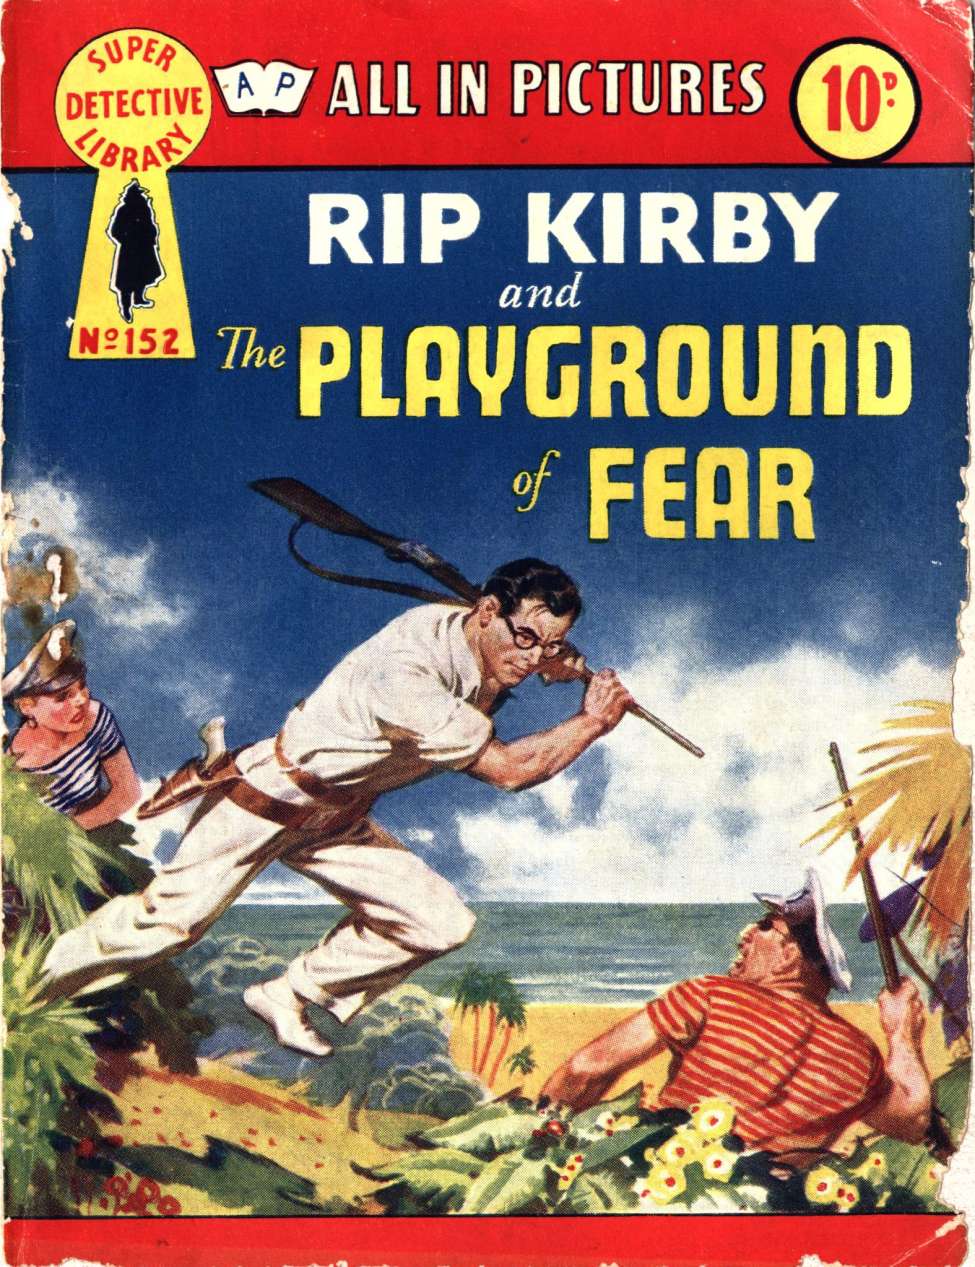 Book Cover For Super Detective Library 152 - The Playground of Fear